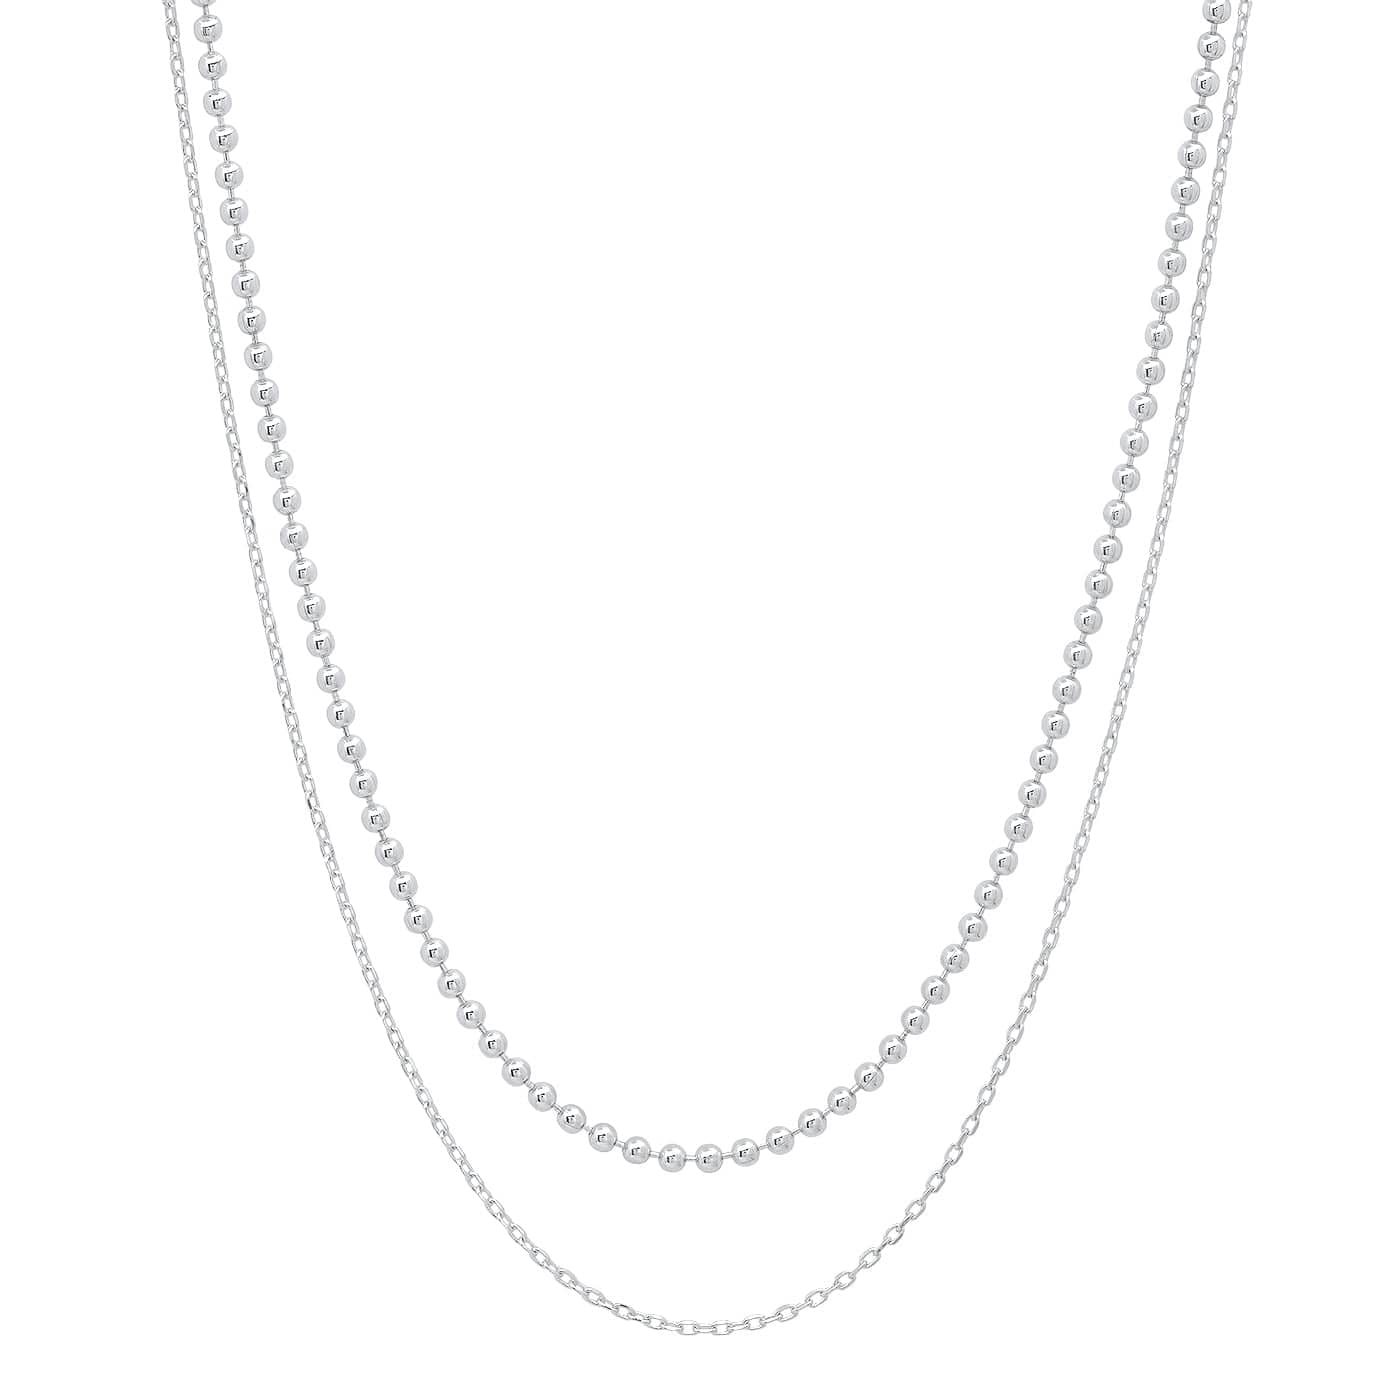 TAI JEWELRY Necklace Silver Double Chain Layering Necklace